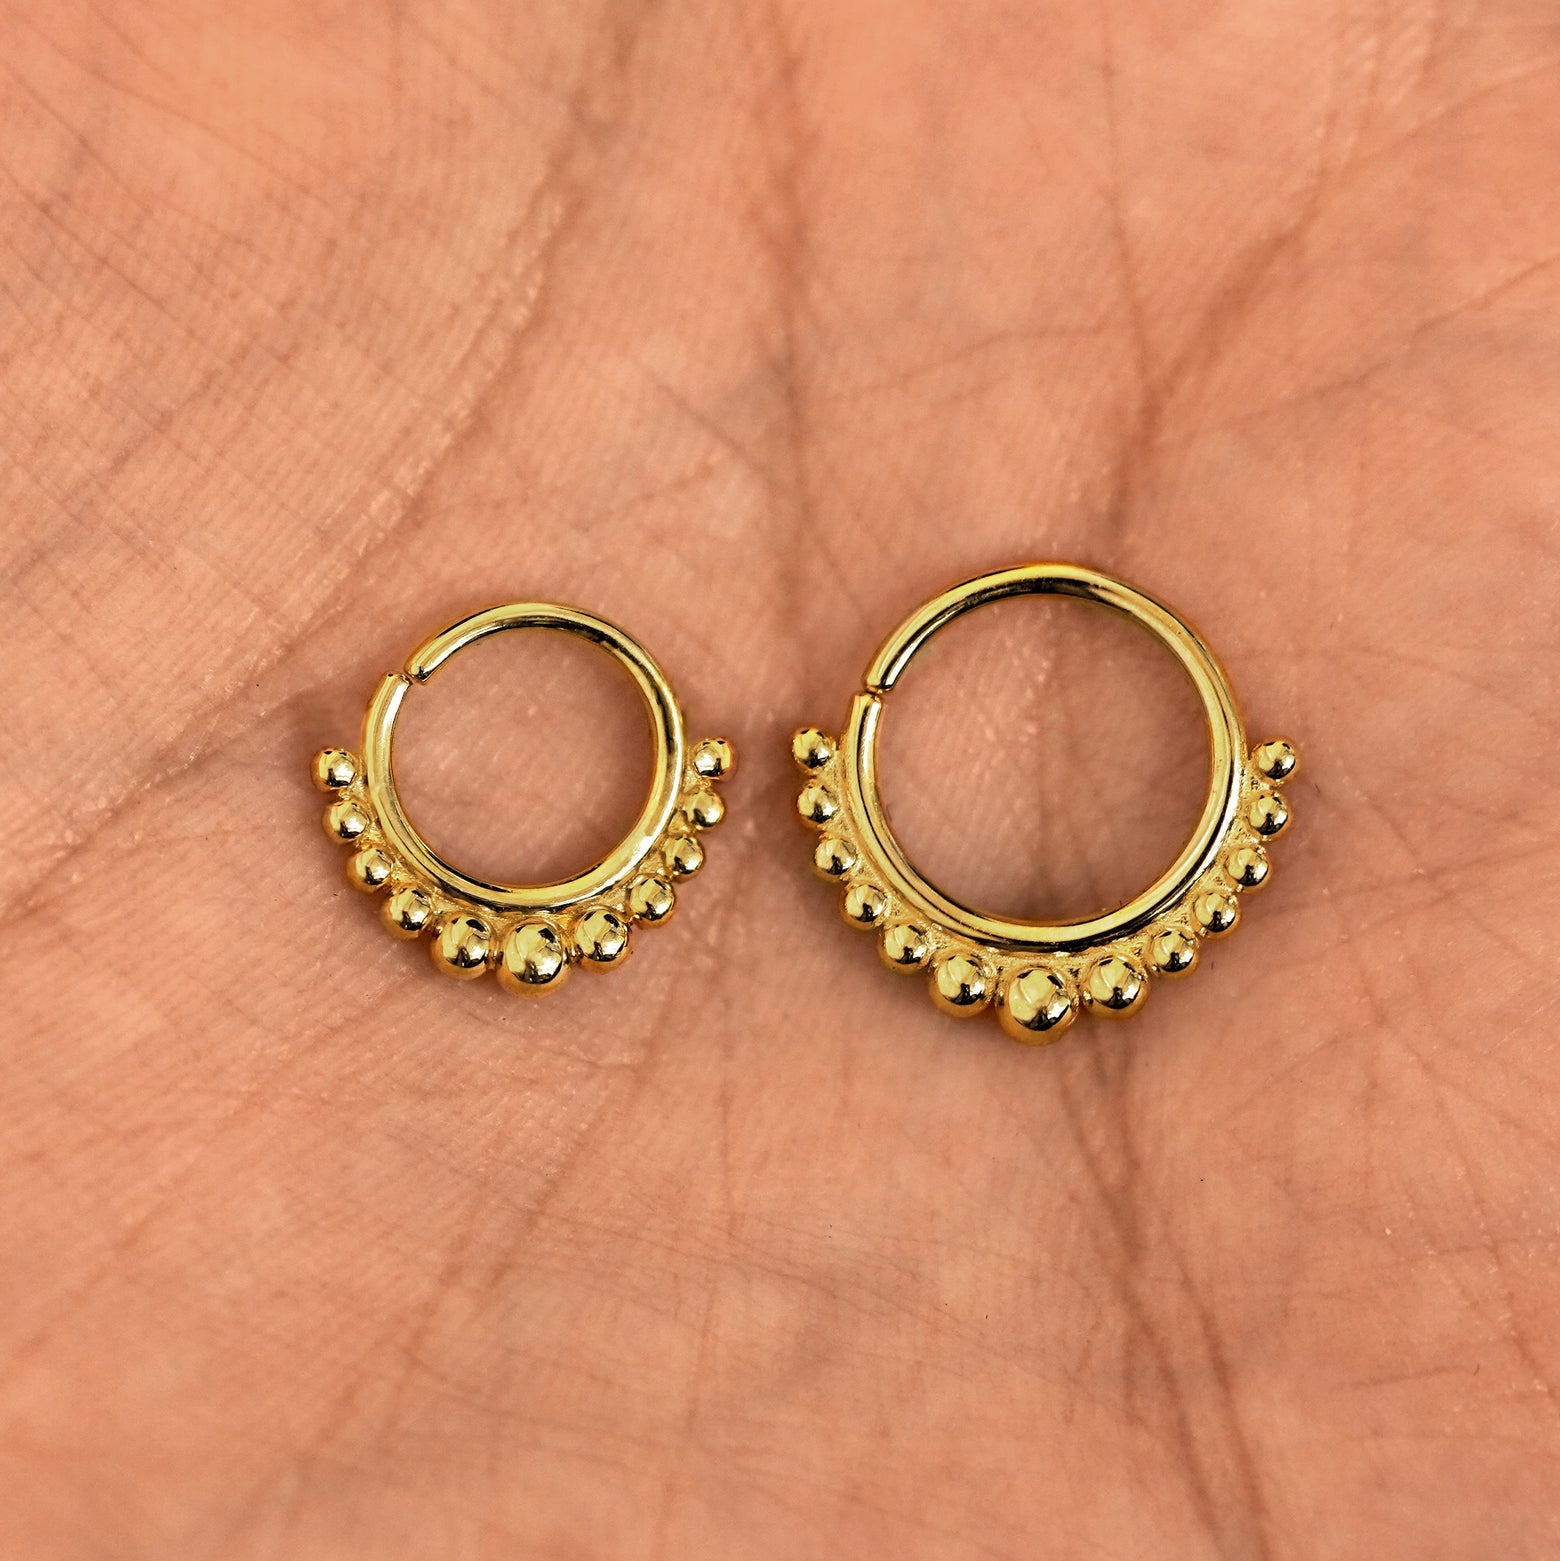 A model's palm holding two versions of the pierced Beaded Septum showing the 8mm and 10mm sizes